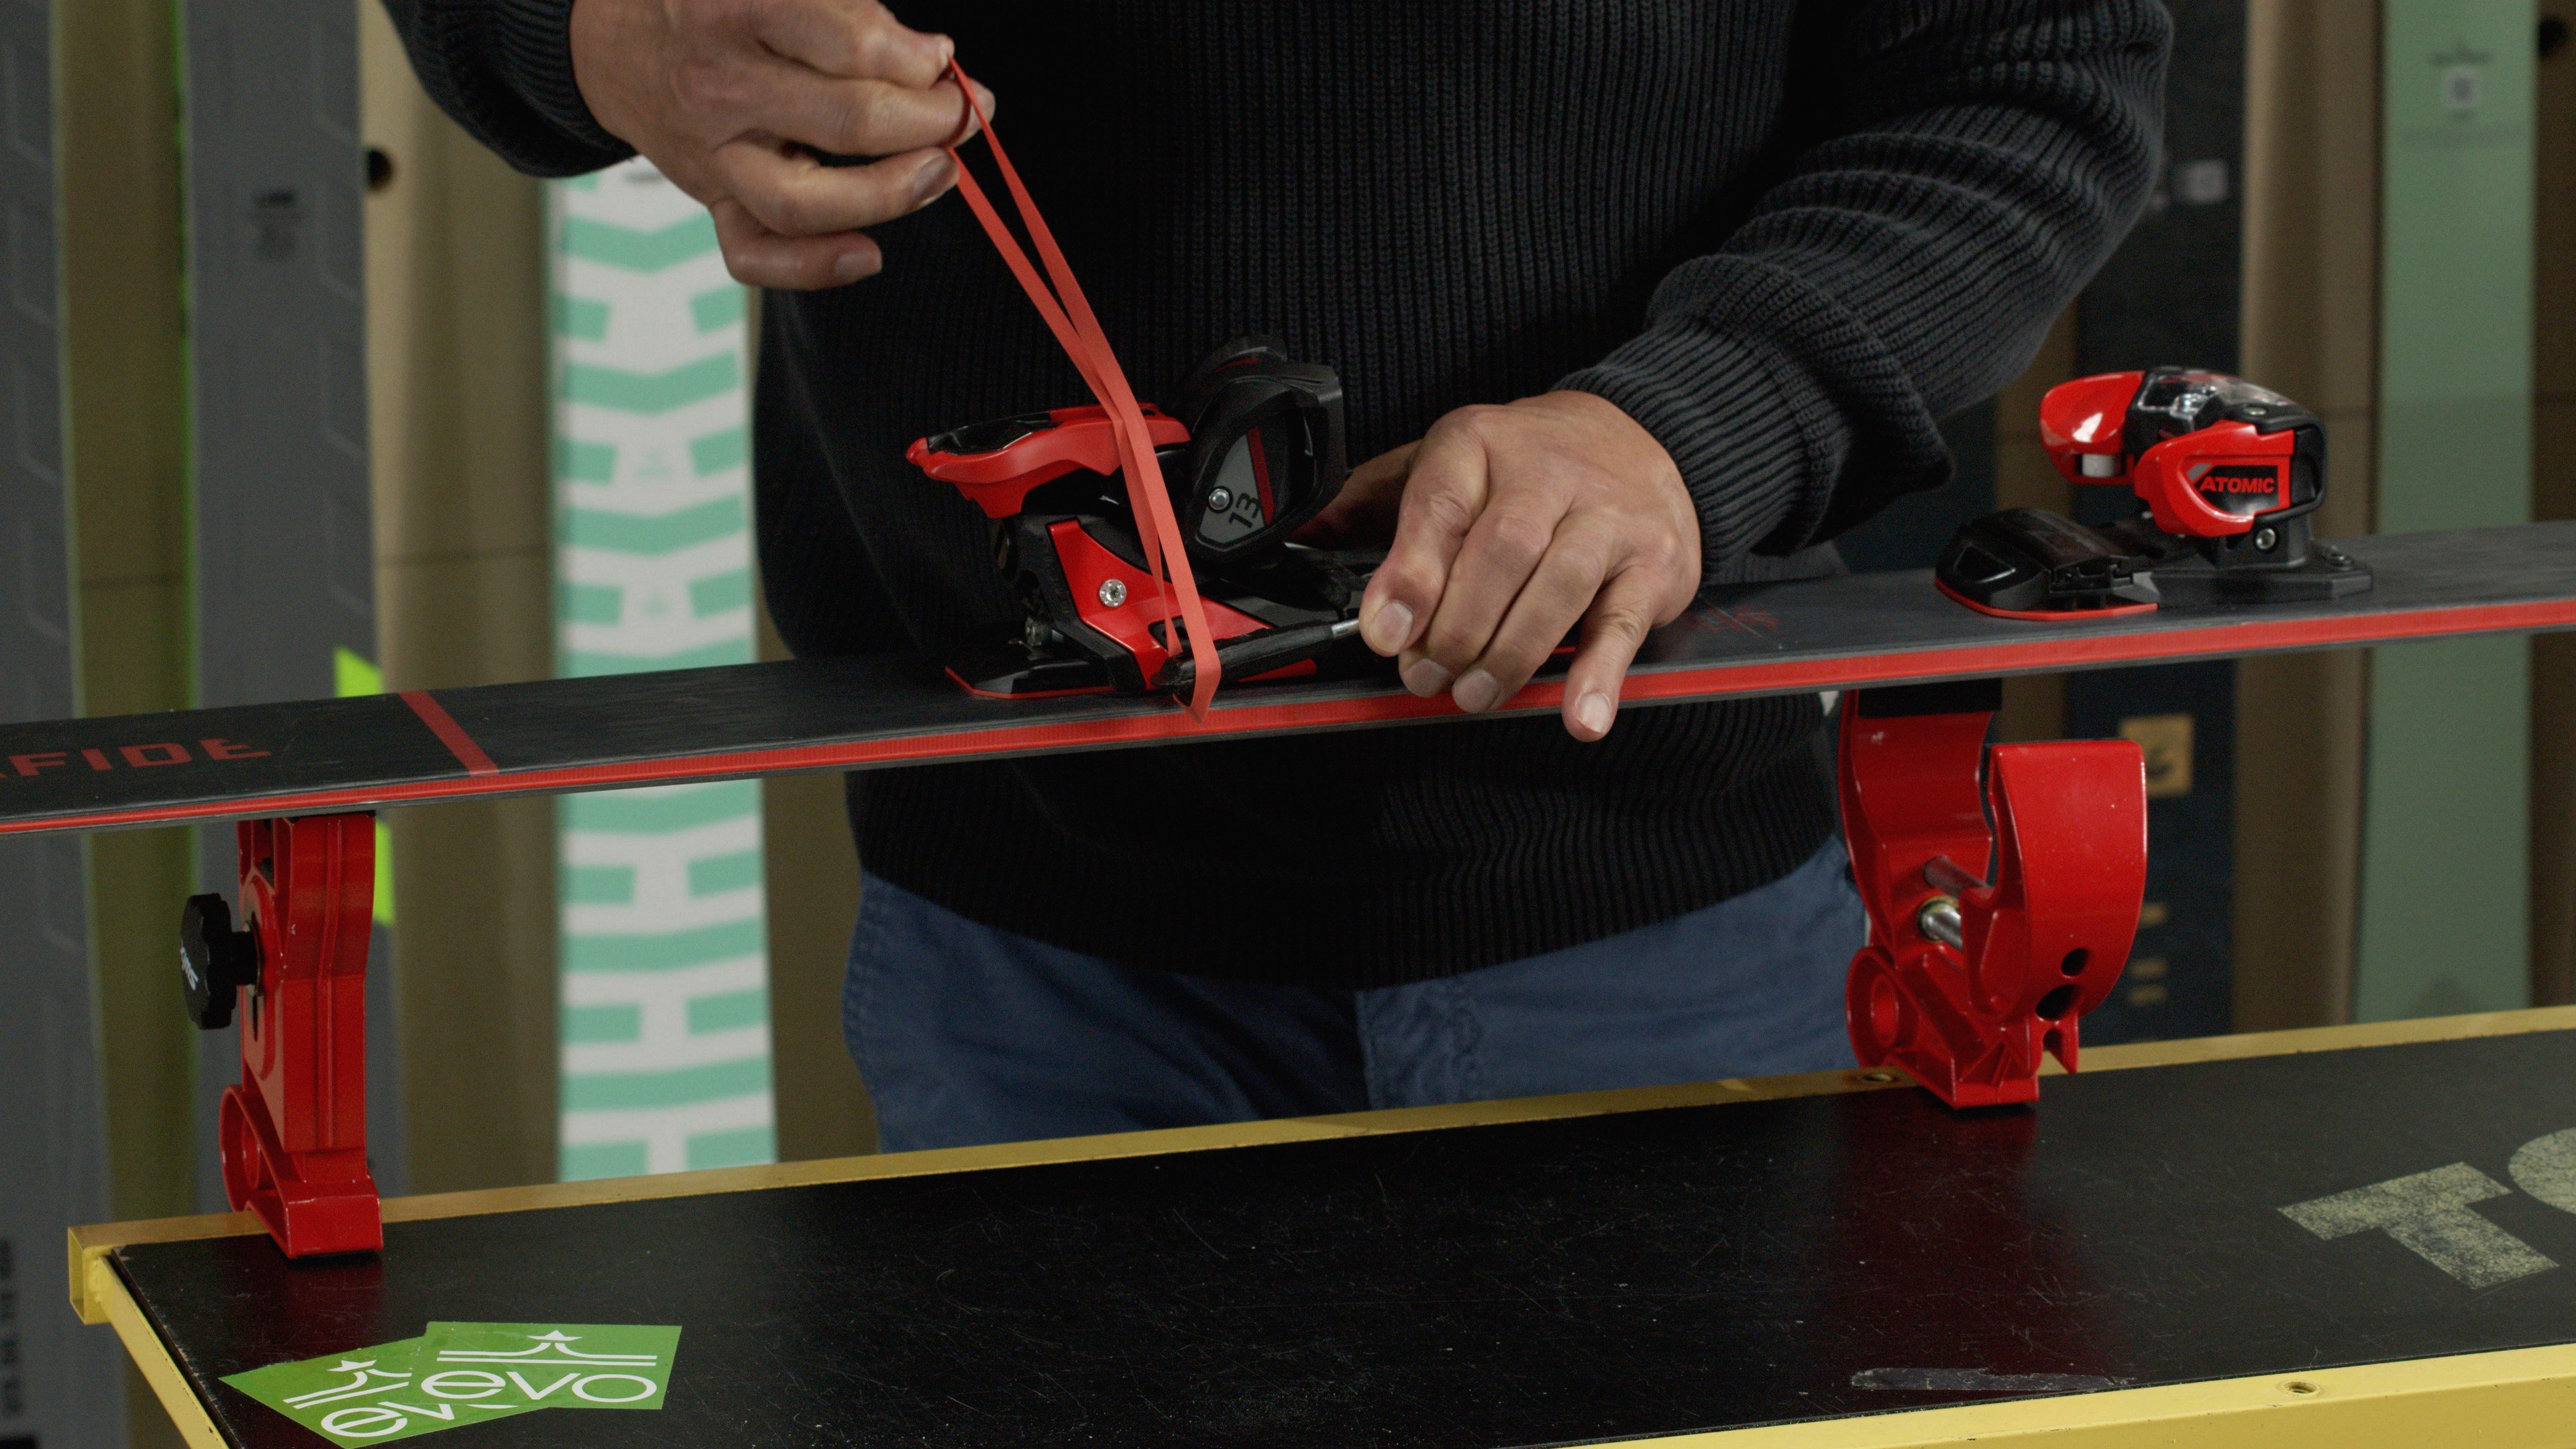 Centimeter server Atlas How to Wax Skis at Home | evo